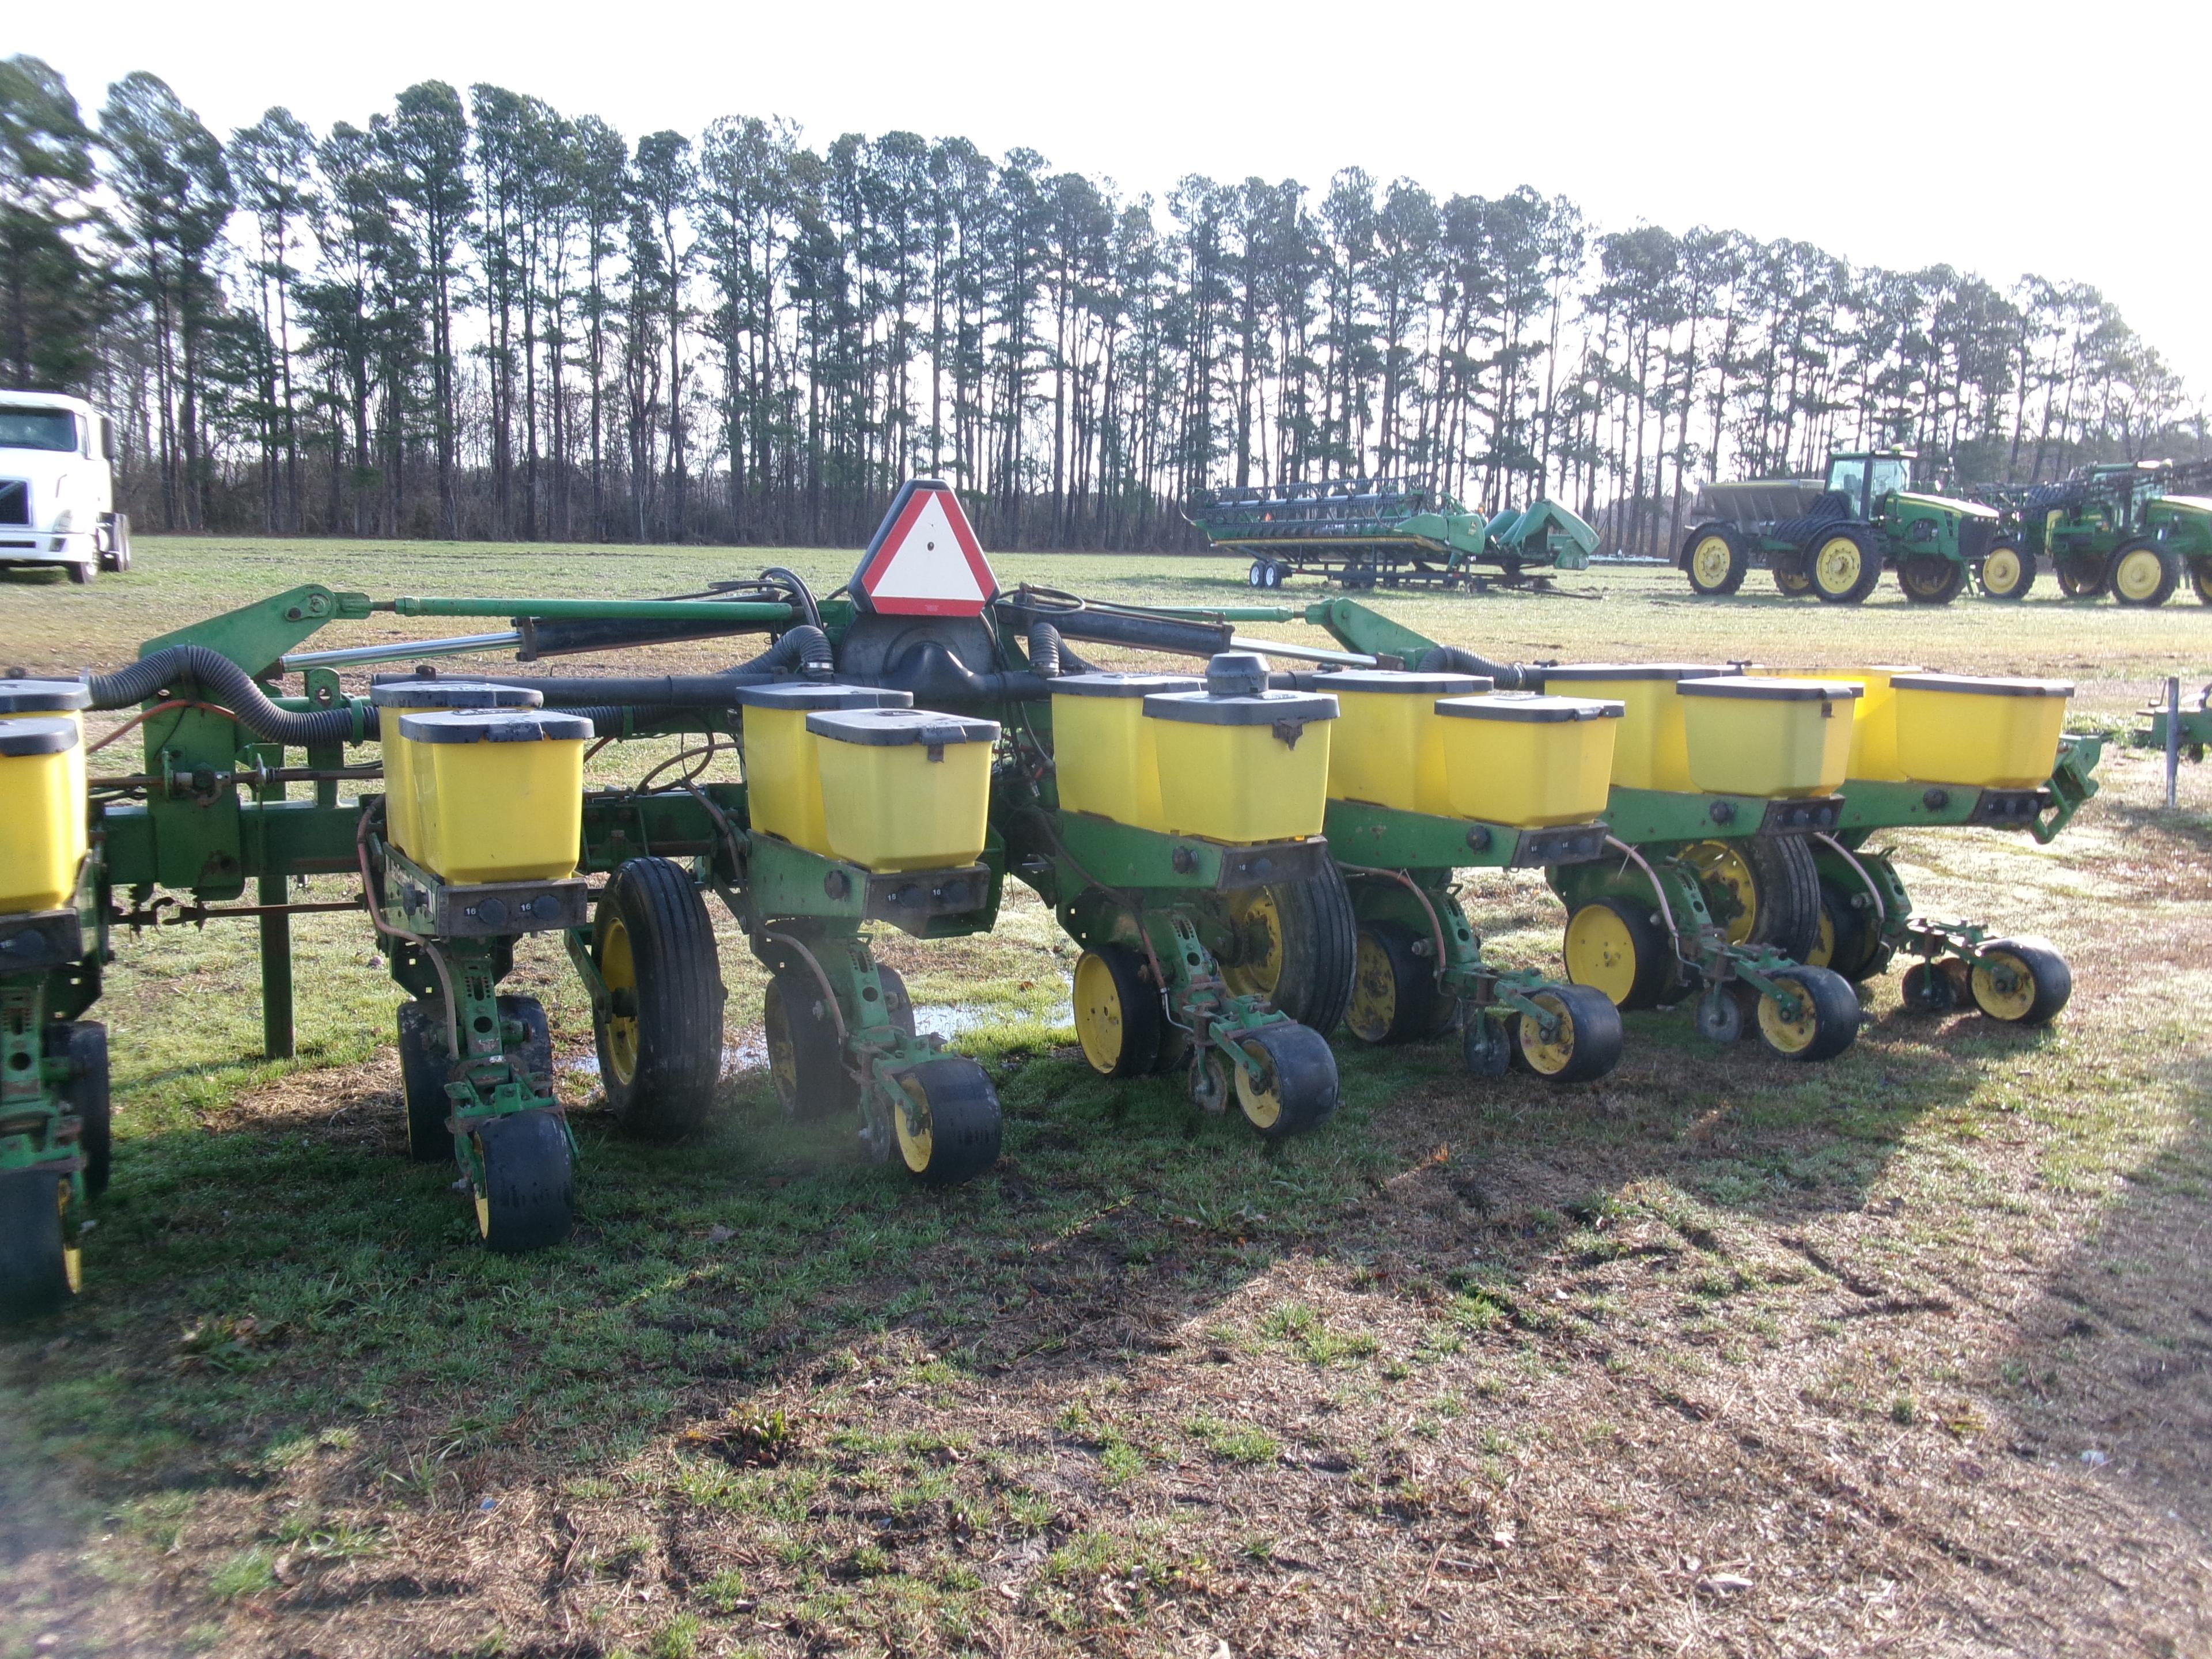 JD 7300 MAXEMERGE 2, 8 ROW VAC PLANTER, STACK FOLD, 36” ROWS, ROW MARKERS